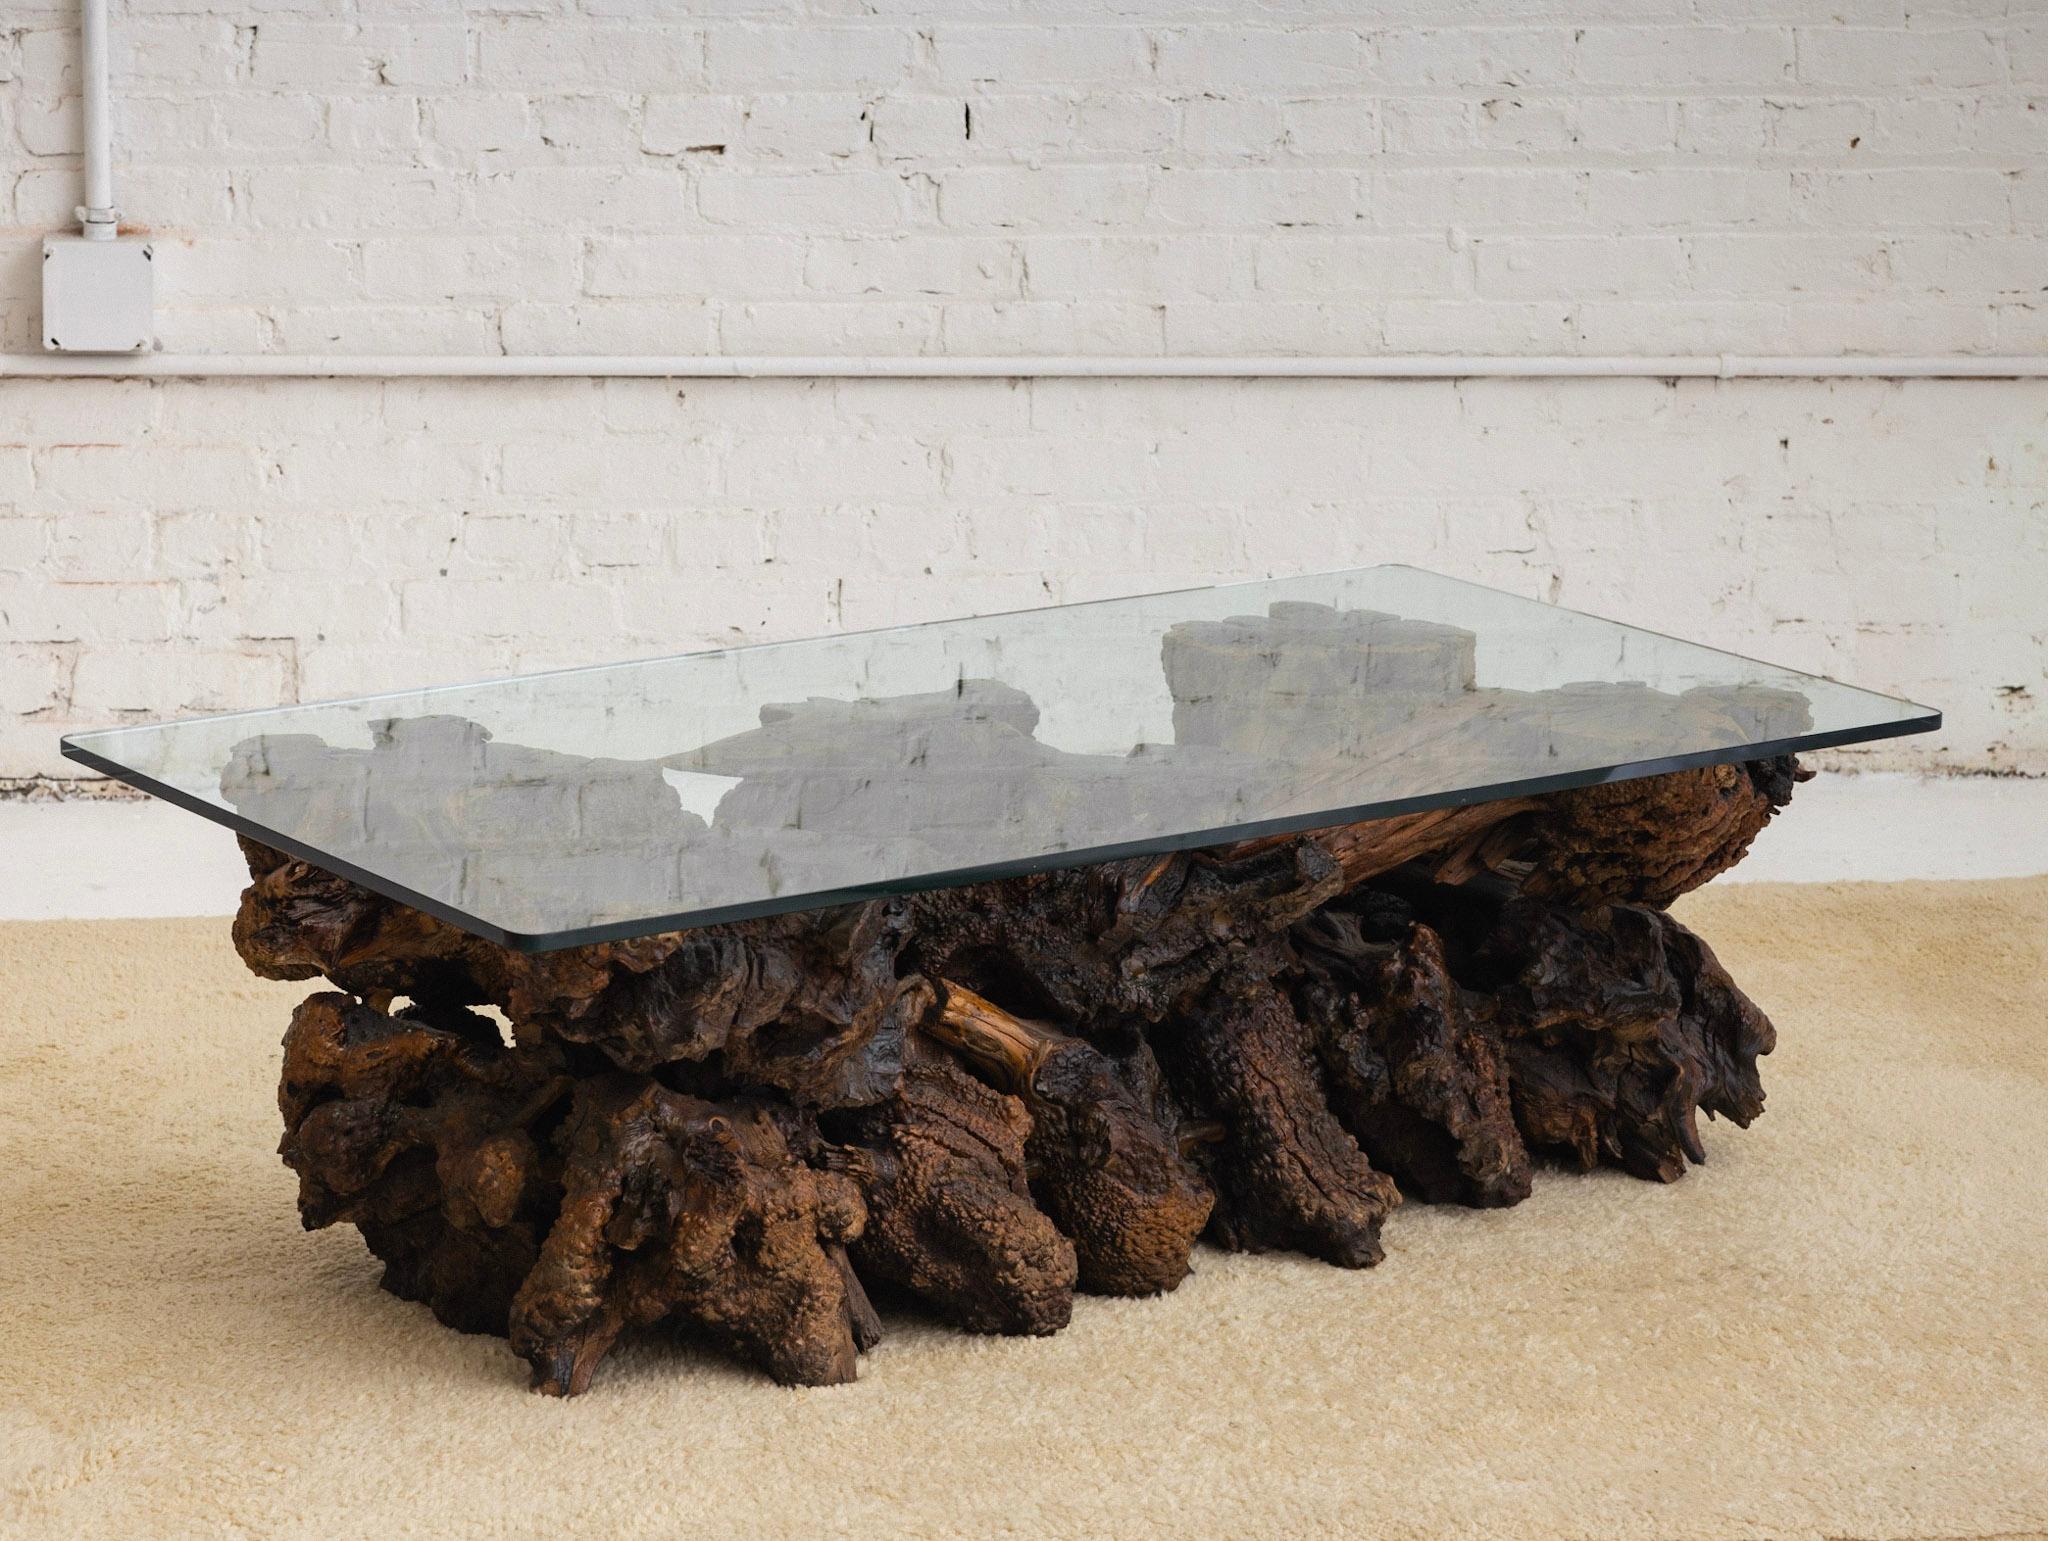 Live edge burl coffee table. Knotty wood forms are pieced together to create this brutalist style coffee table base. Lacquered and upper surface polished to show rich color and wood grain. Thick rectangular glass with rounded corners rests on top.